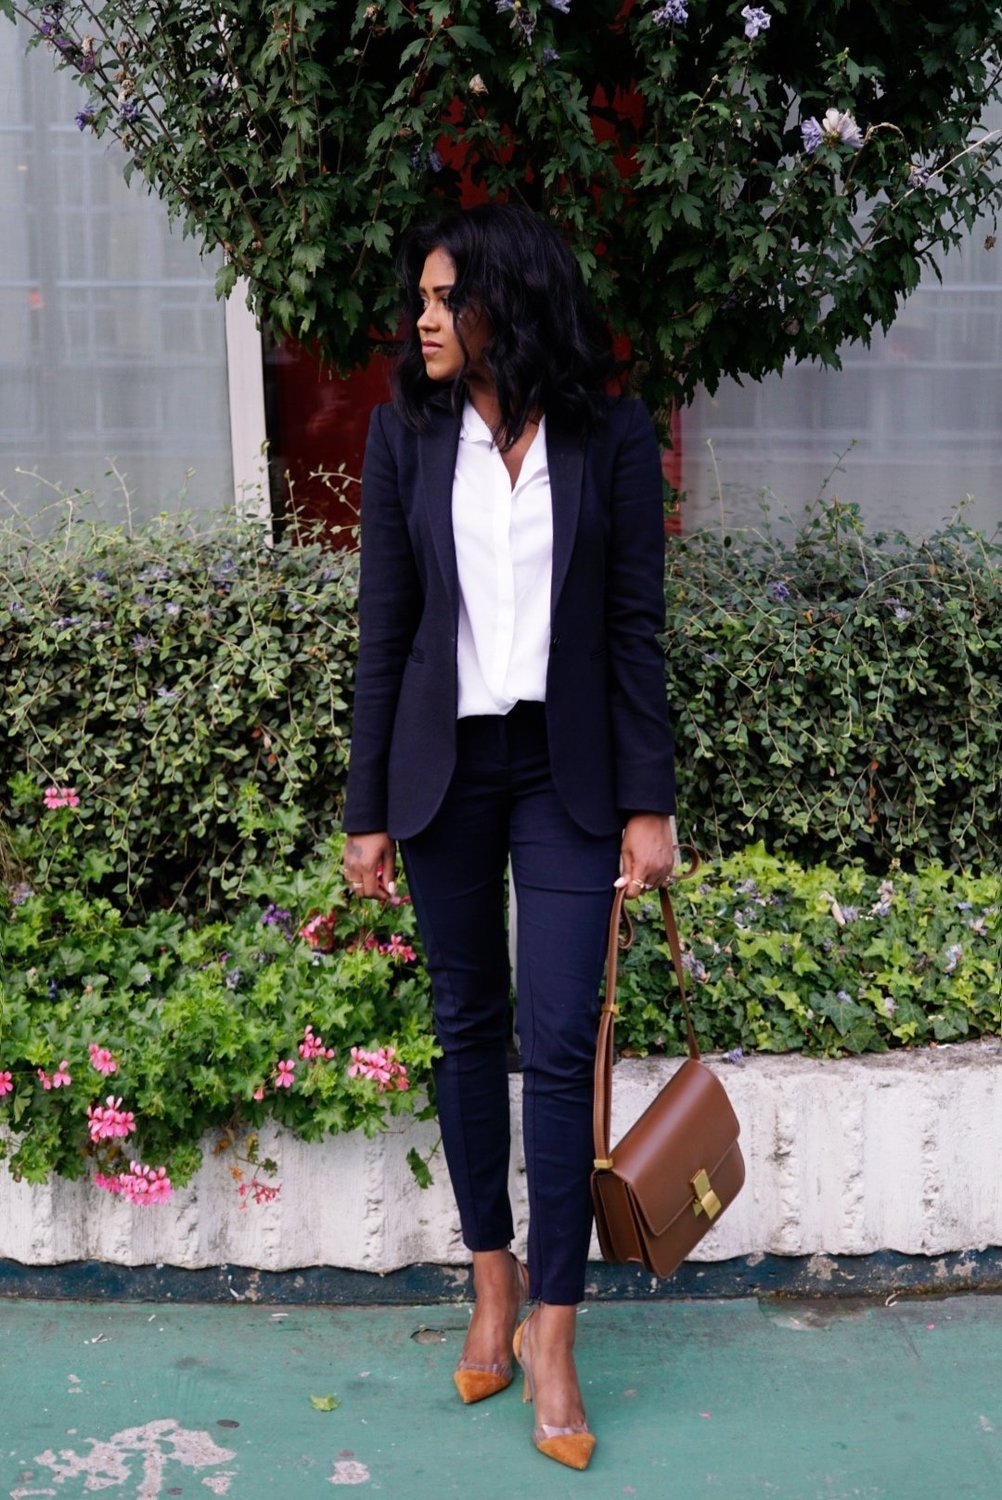 Sachini wearing a black suit and black holding a brown Celine bag